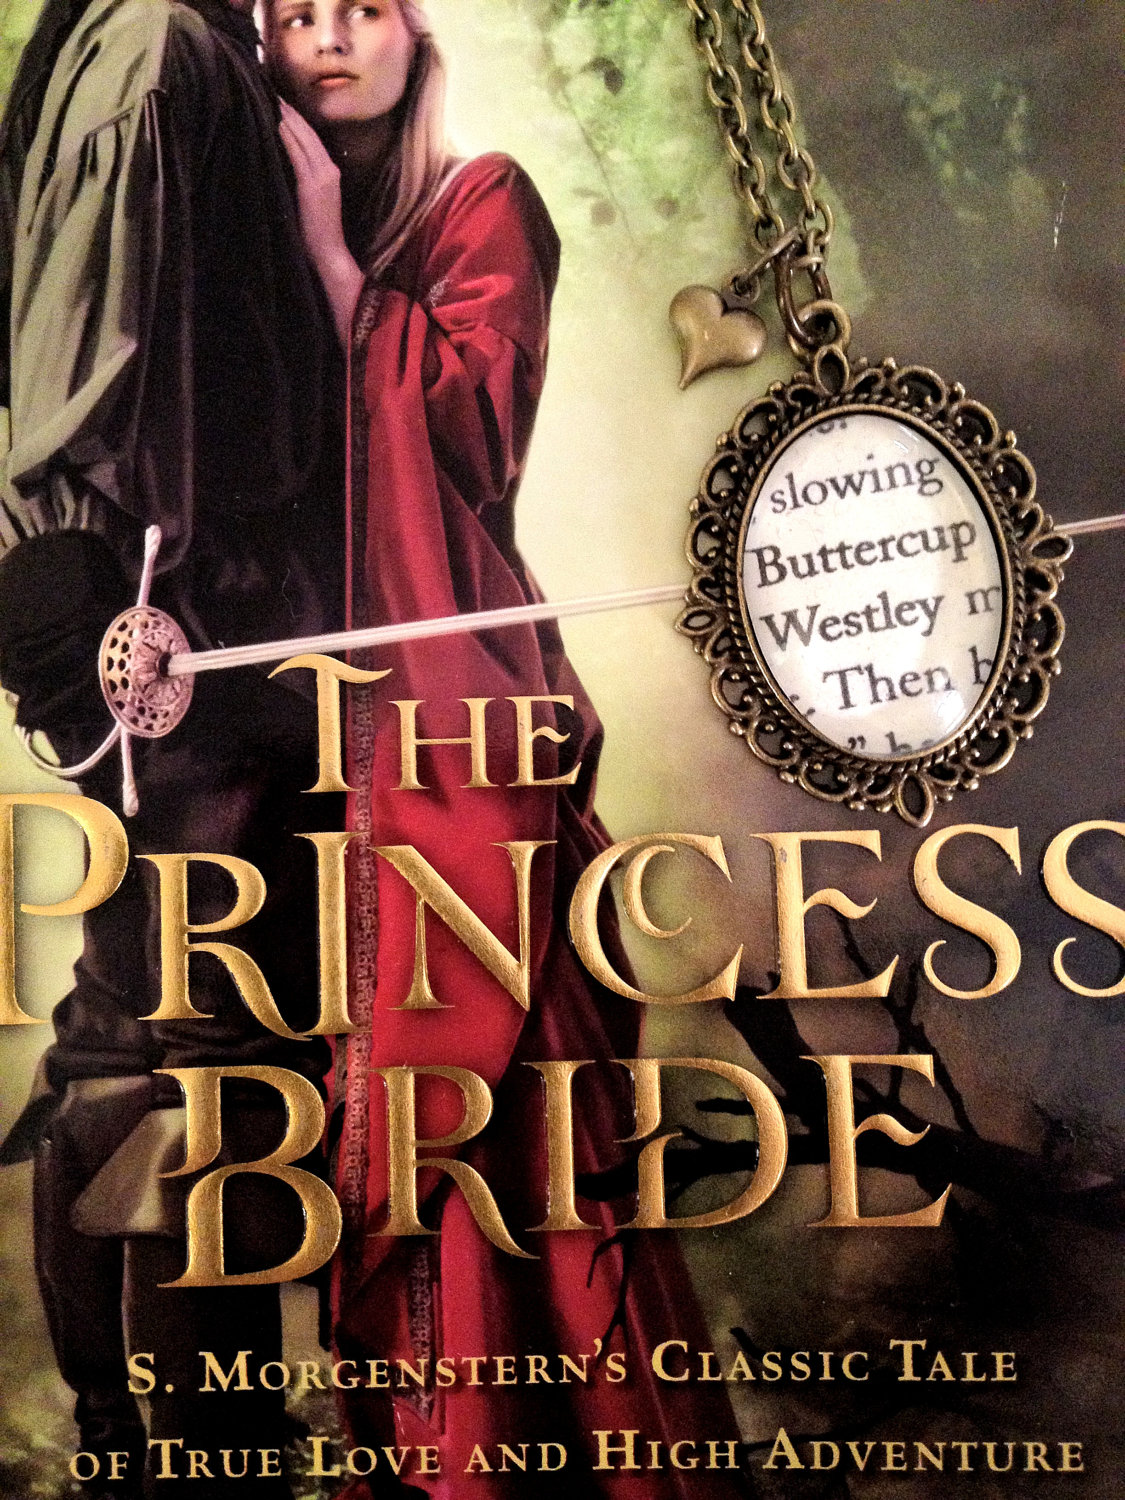 Buttercup And Westley From William Goldman's Princess Bride Antiqued Bronze Book Page Necklace